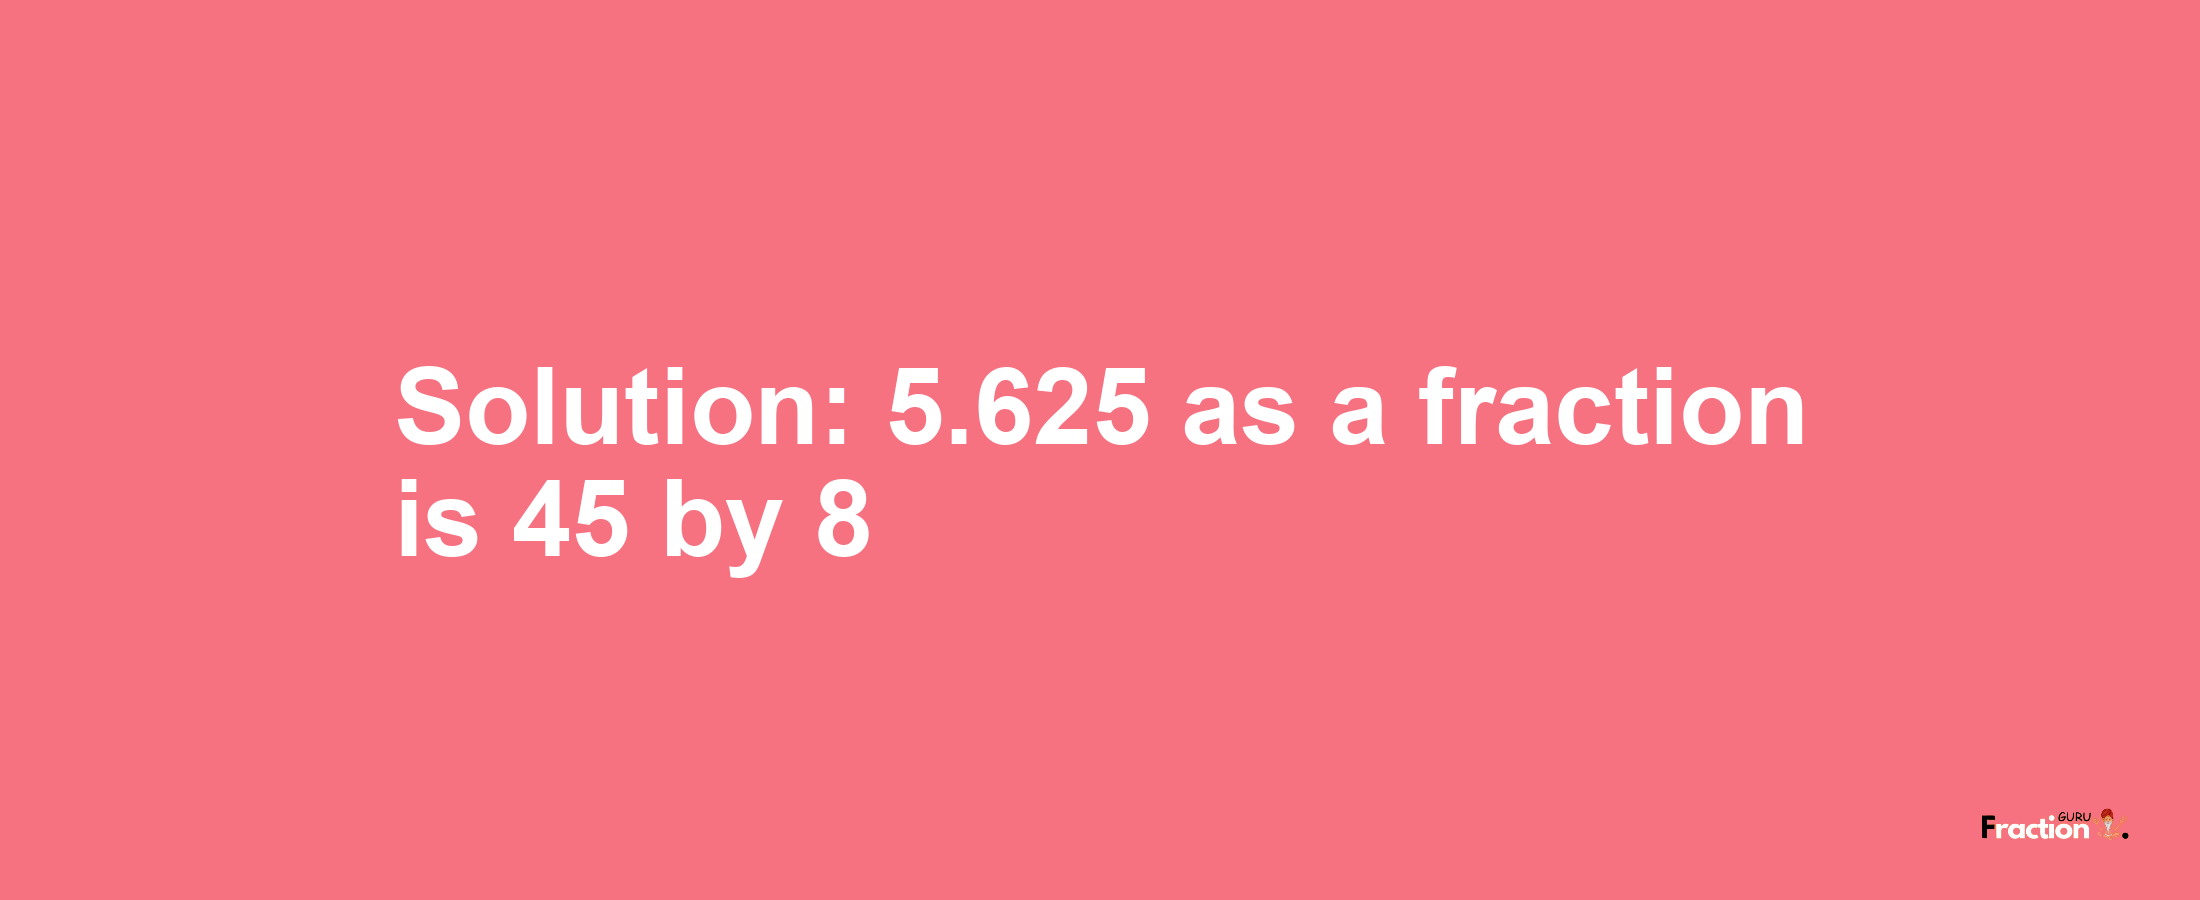 Solution:5.625 as a fraction is 45/8